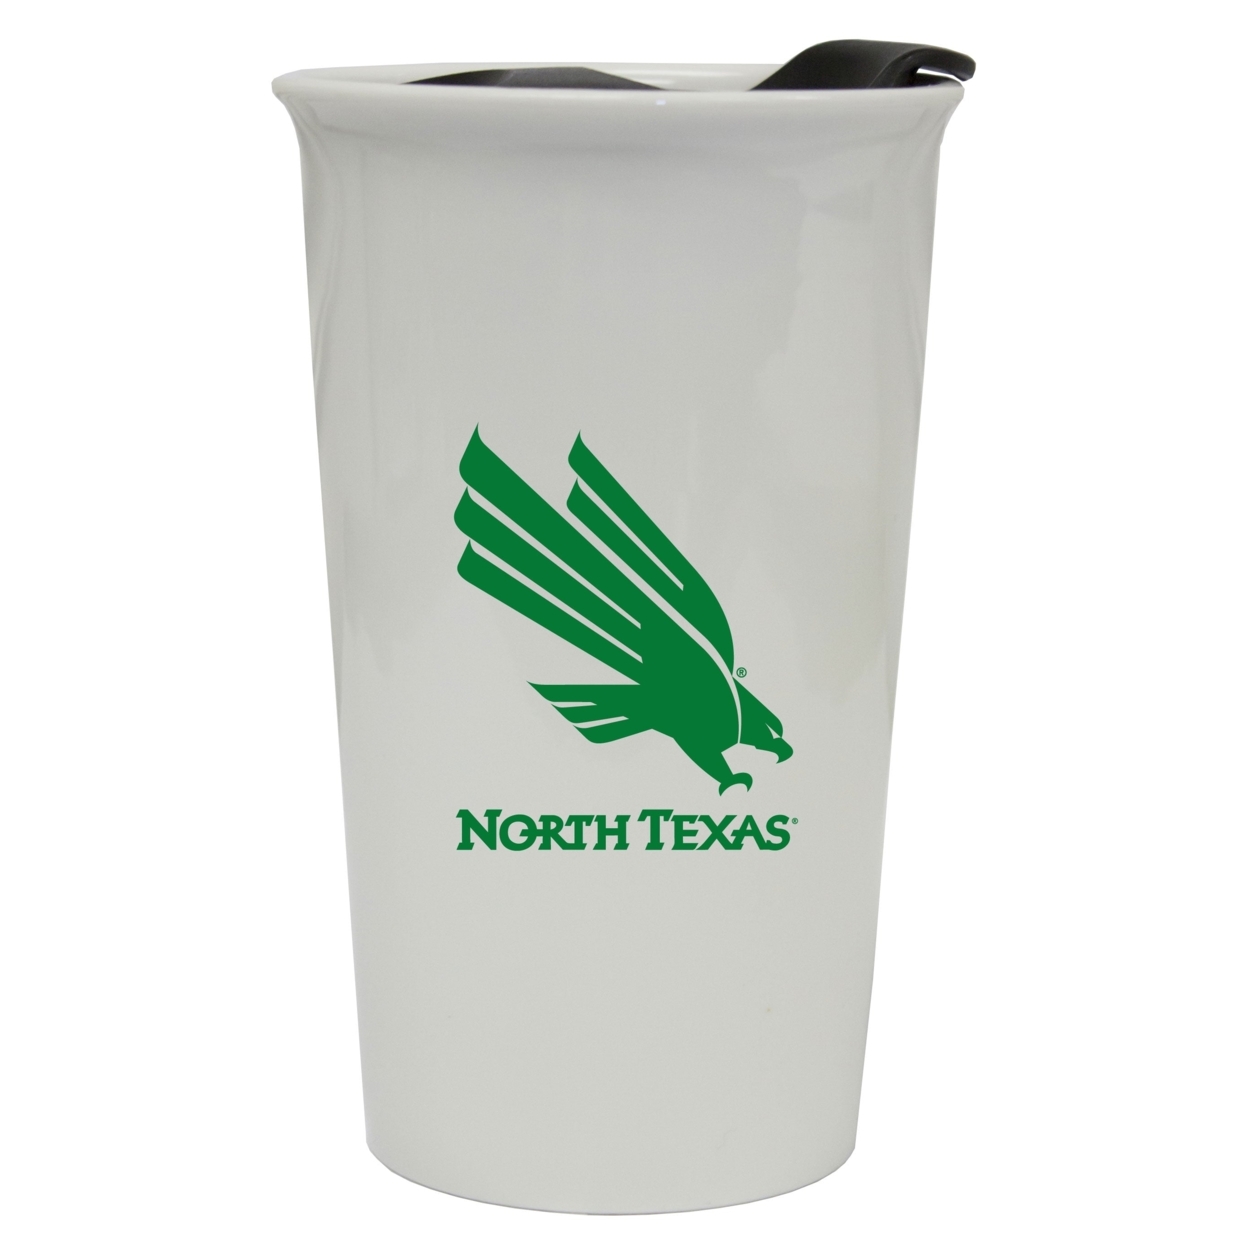 North Texas Double Walled Ceramic Tumbler